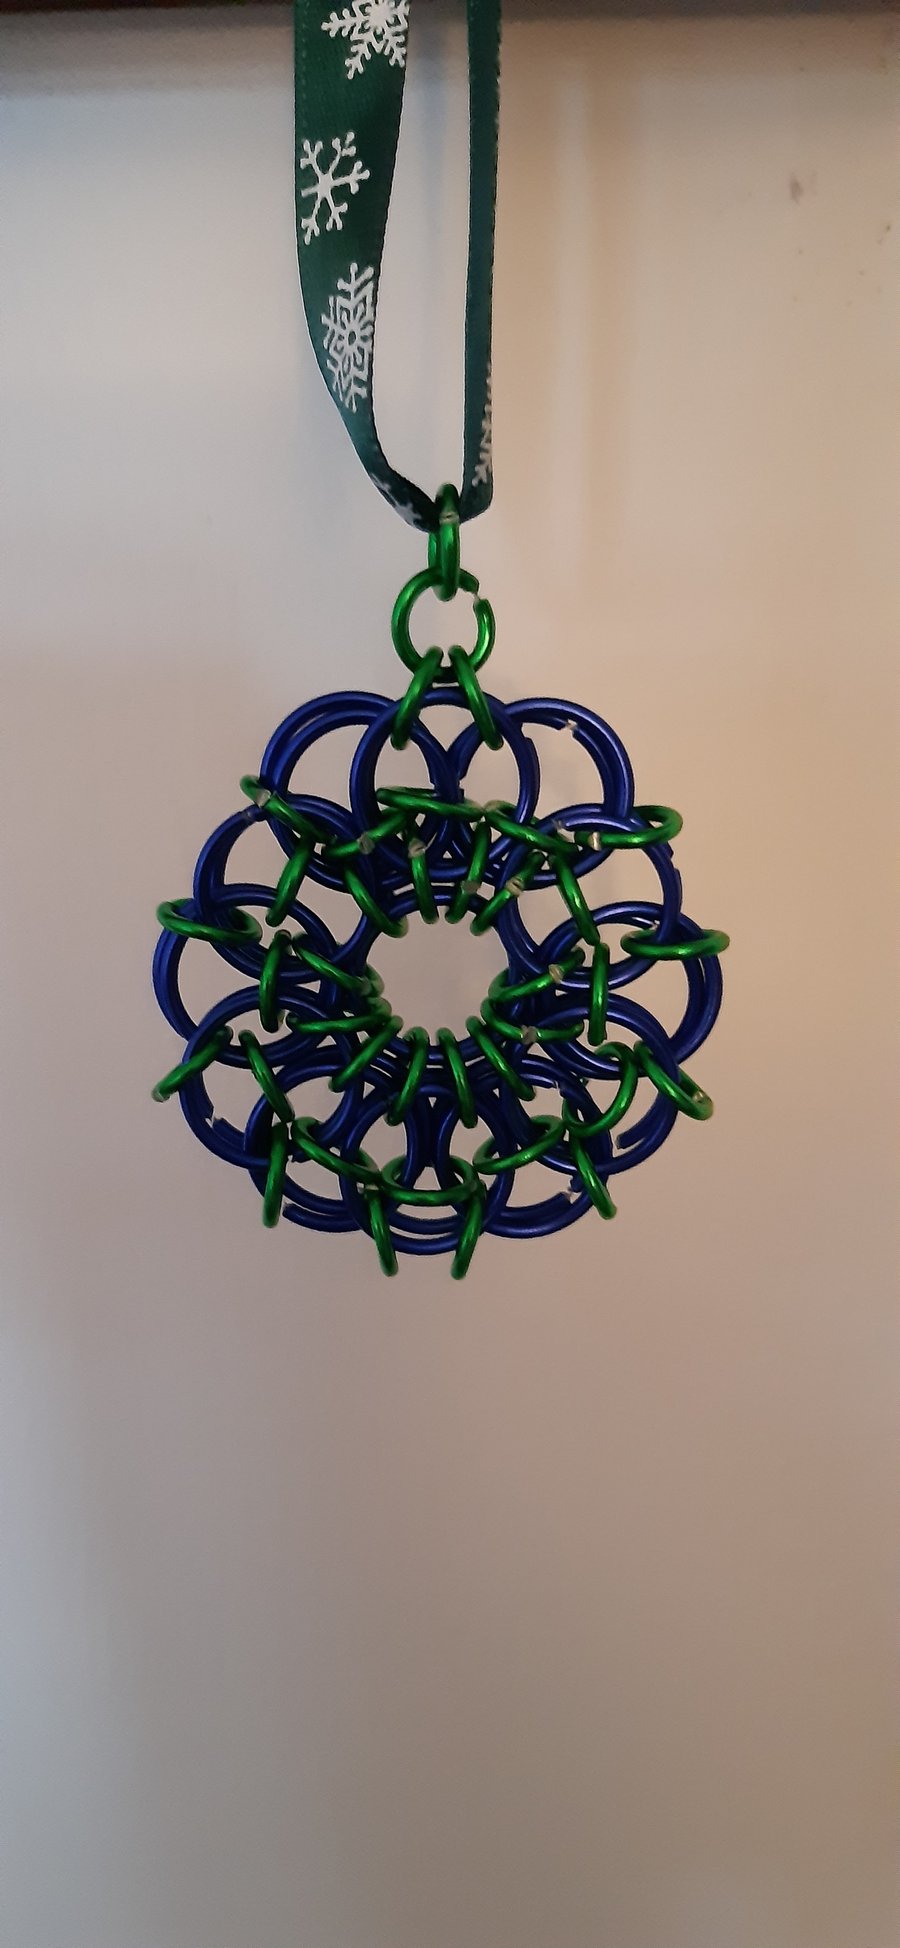 Chainmail silent night Christmas decoration bauble blue and green wreath